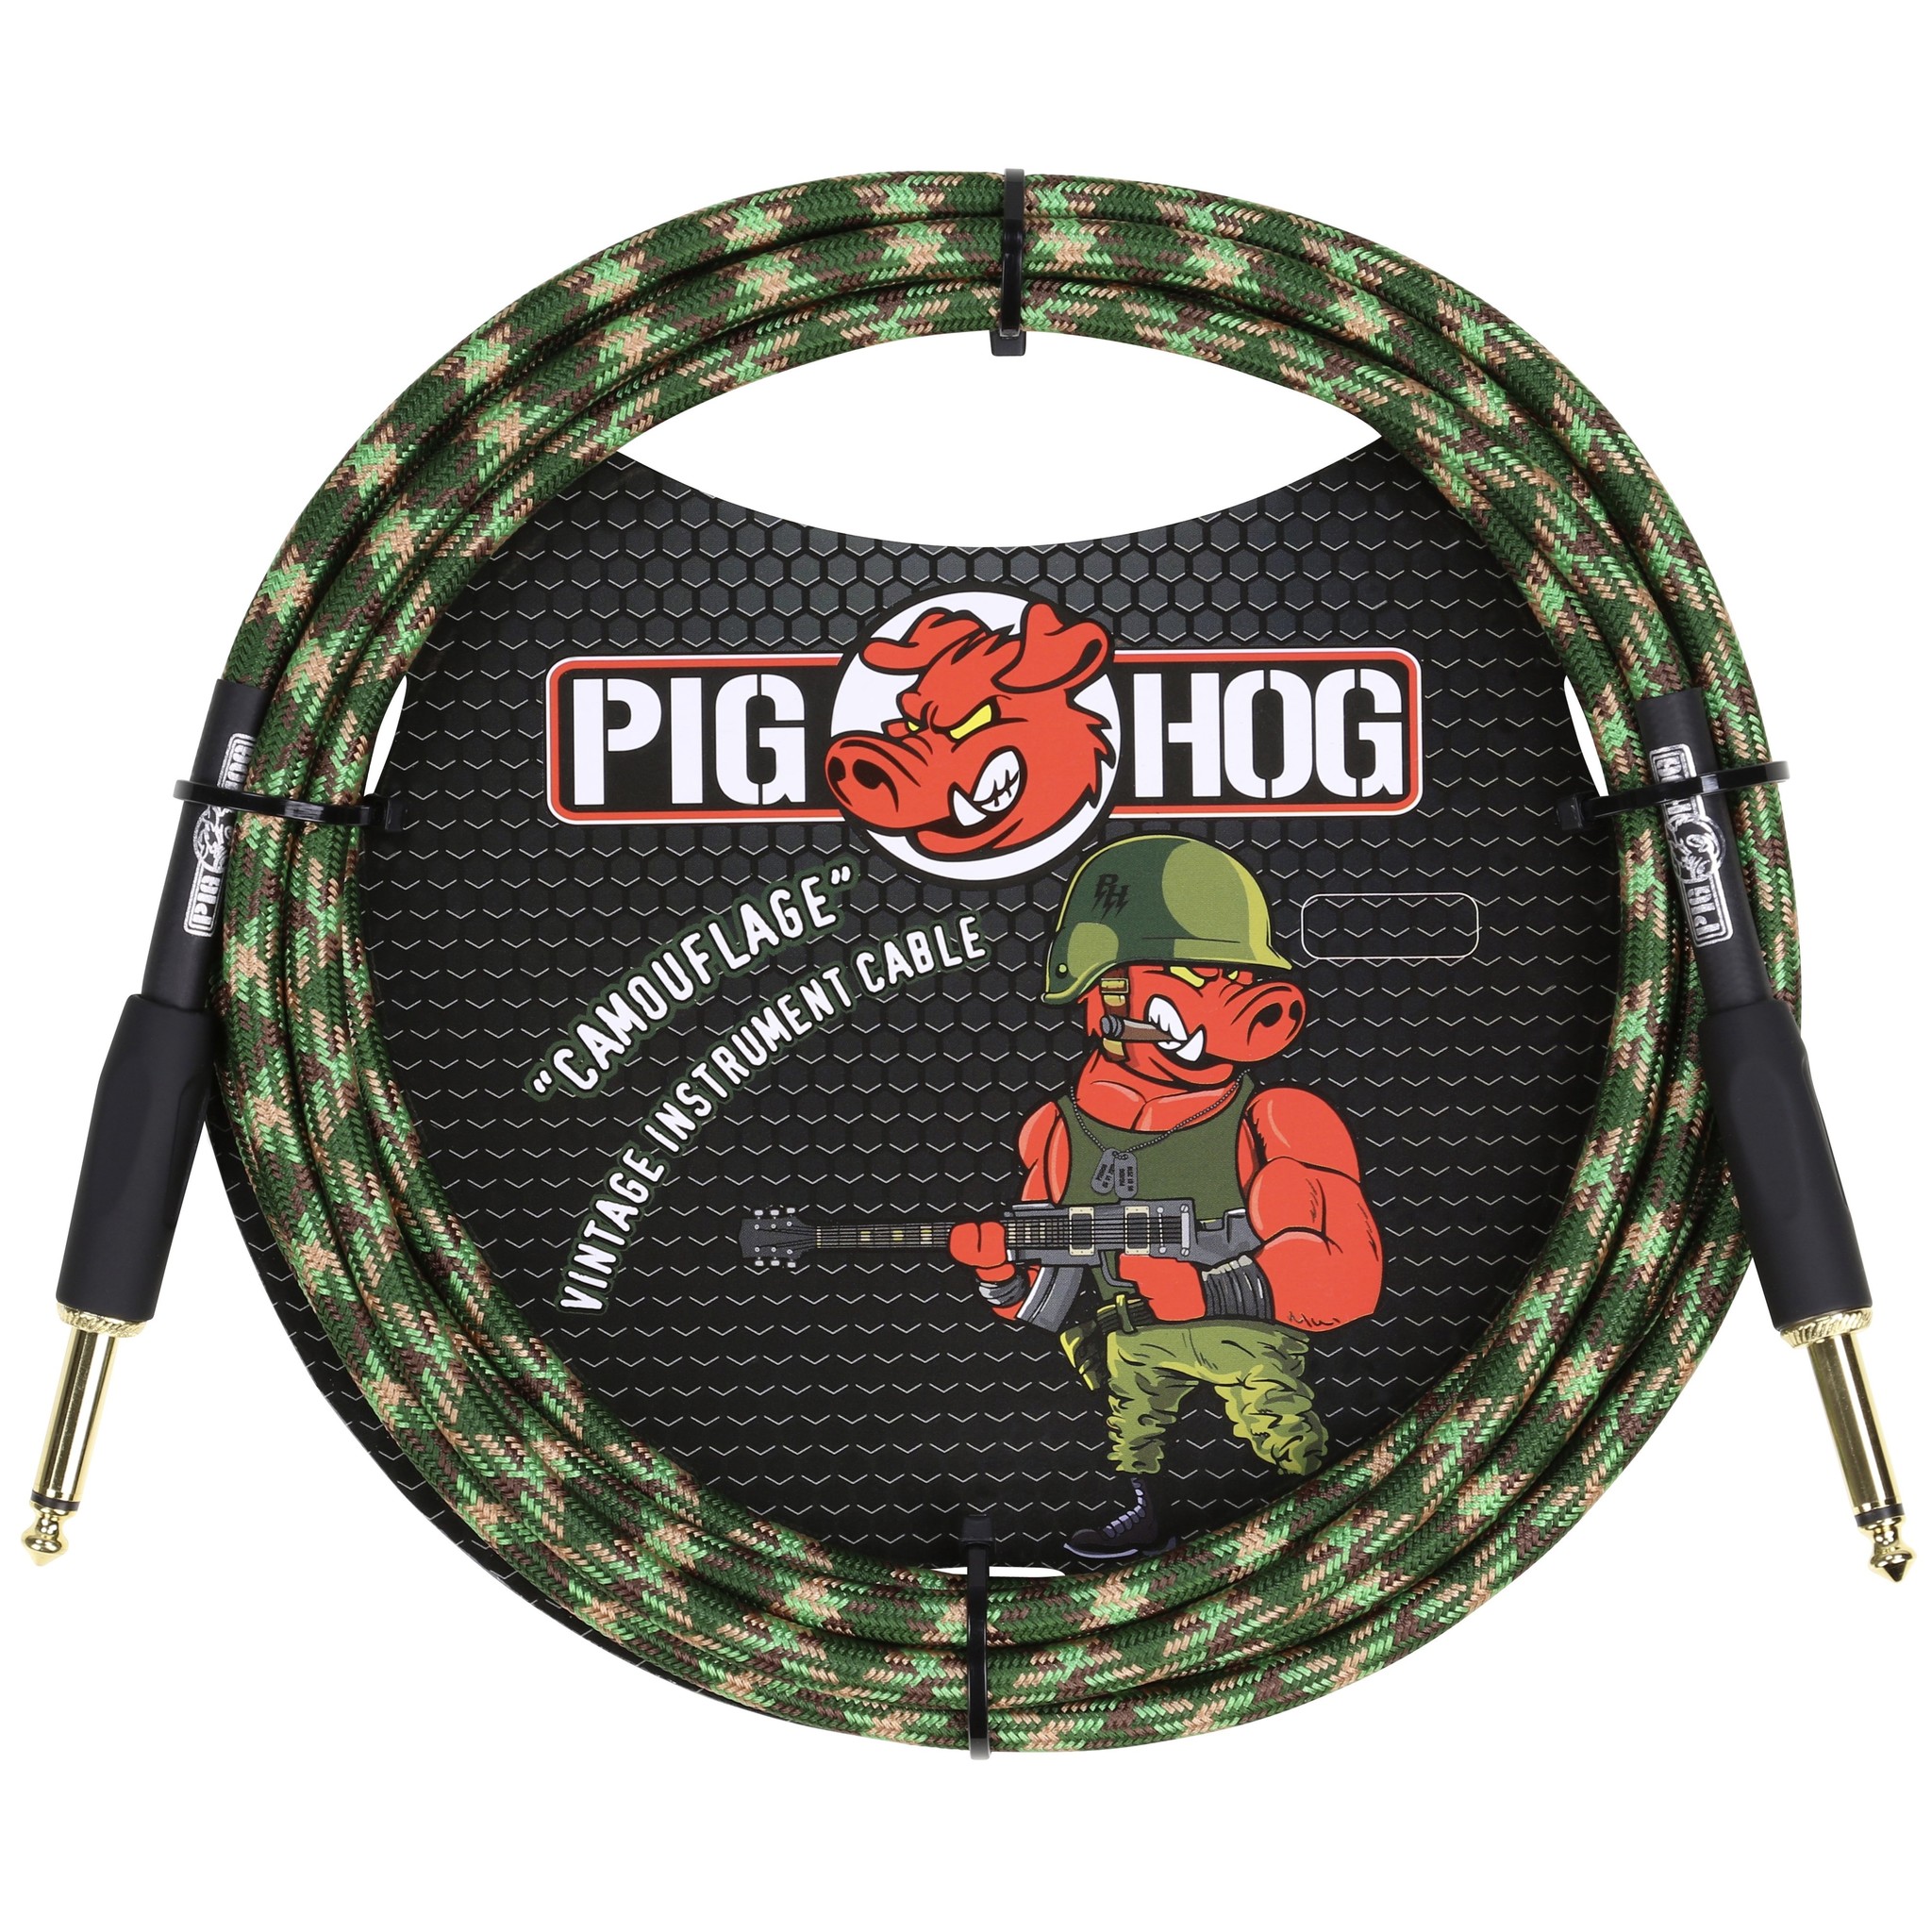 Pig Hog "Camouflage" Vintage Instrument Cable, 10ft Straight (PCH10CF)